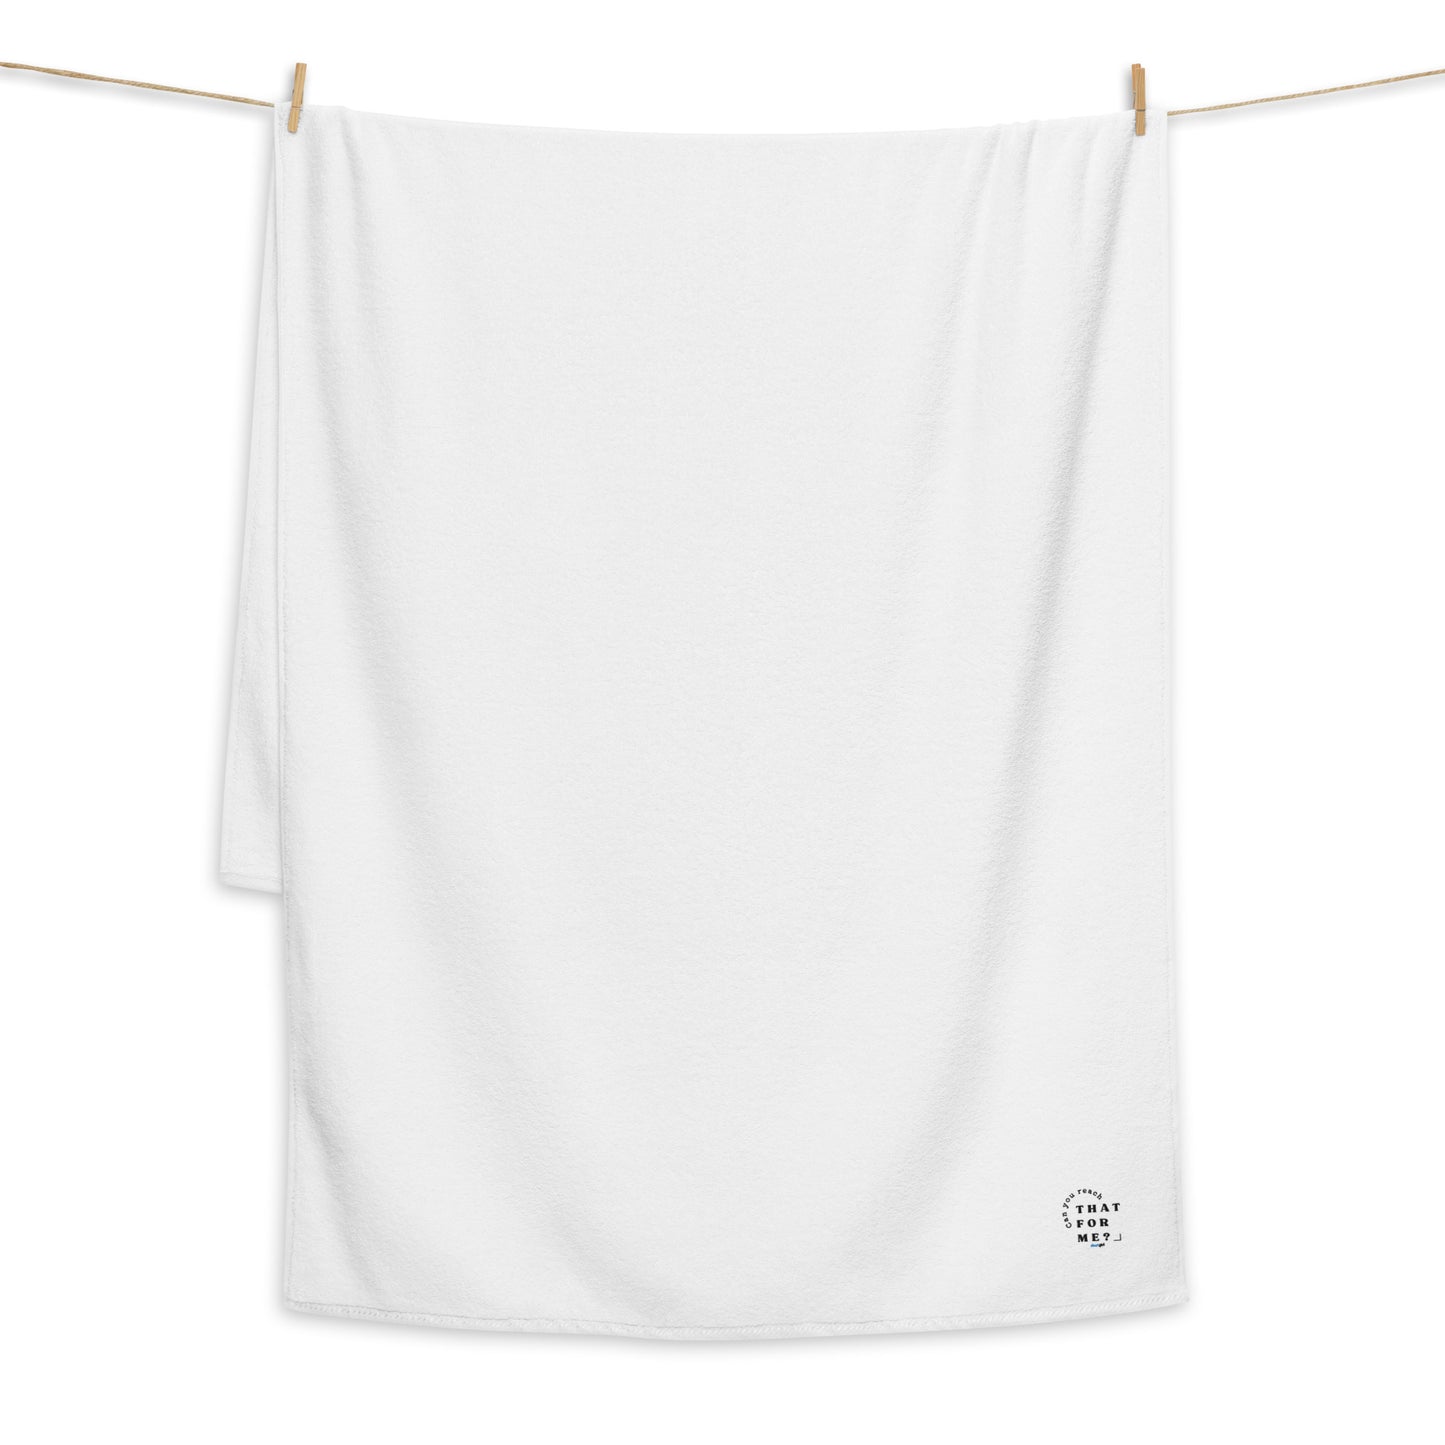 Turkish cotton towel - Can you reach that for me?